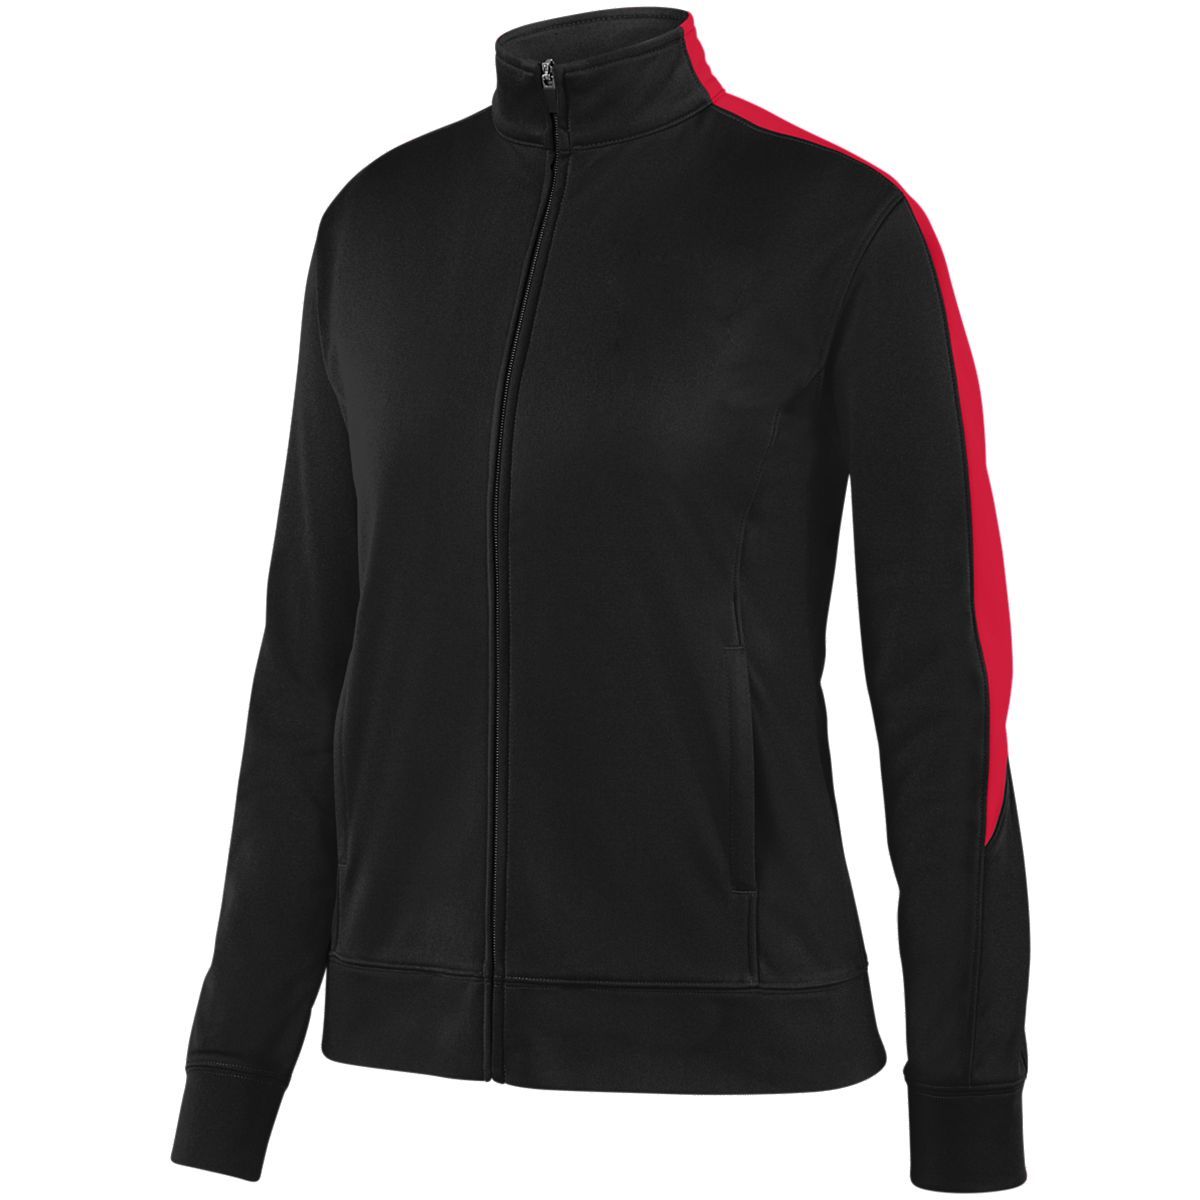 Augusta Sportswear Ladies Medalist Jacket 2.0 in Black/Red  -Part of the Ladies, Ladies-Jacket, Augusta-Products, Outerwear product lines at KanaleyCreations.com